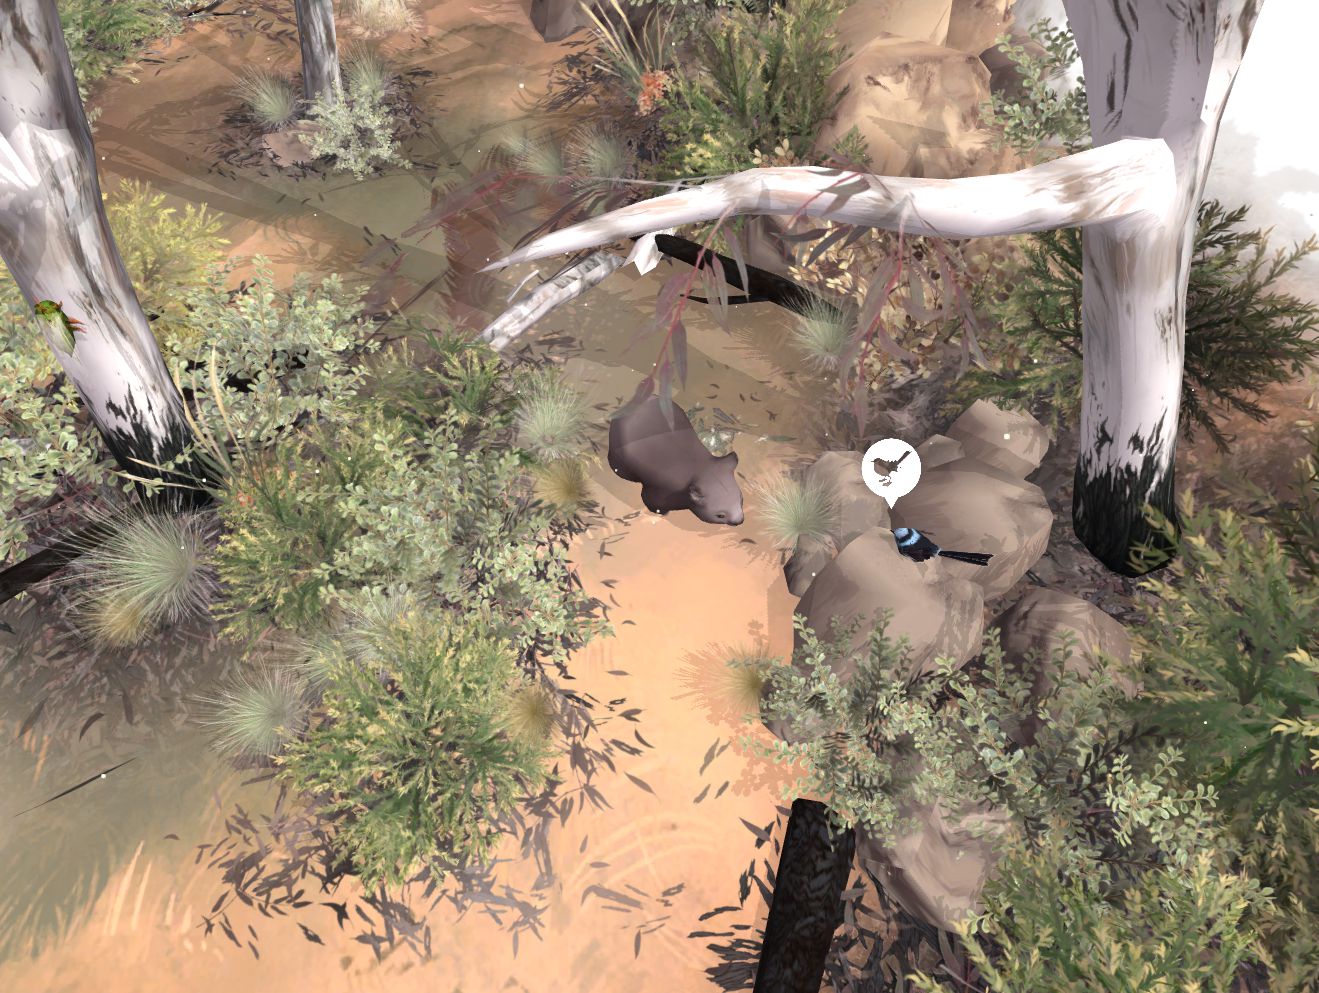 PaperBark is a game from Melbourne developer Paper House about the life of a wombat during a hot Australian bush summer.